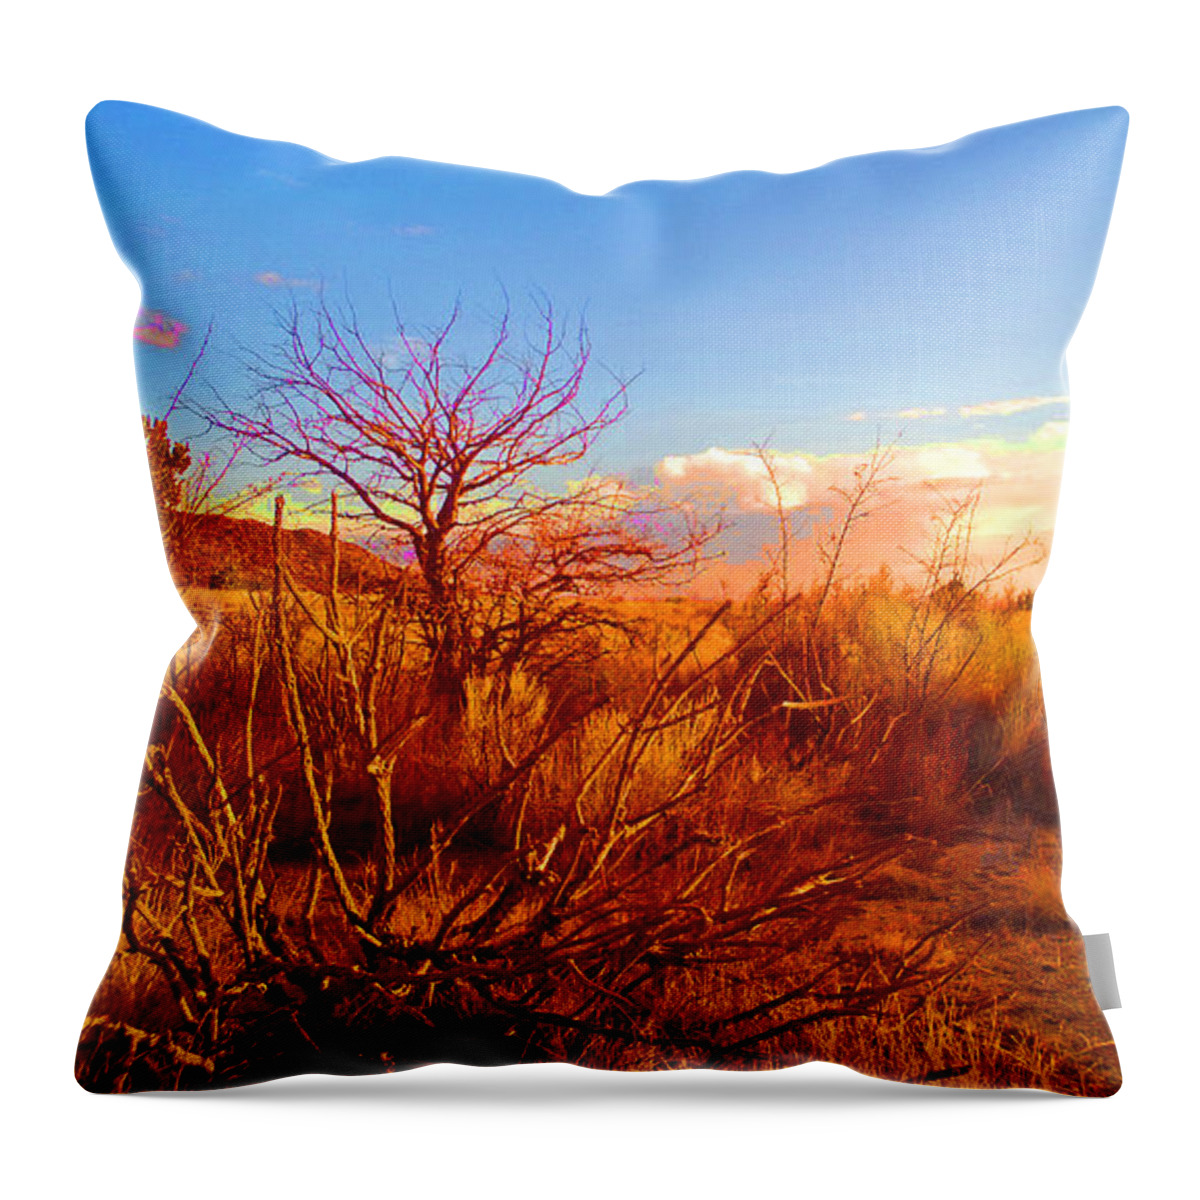 Southwest Throw Pillow featuring the photograph Branching Out by Claudia Goodell